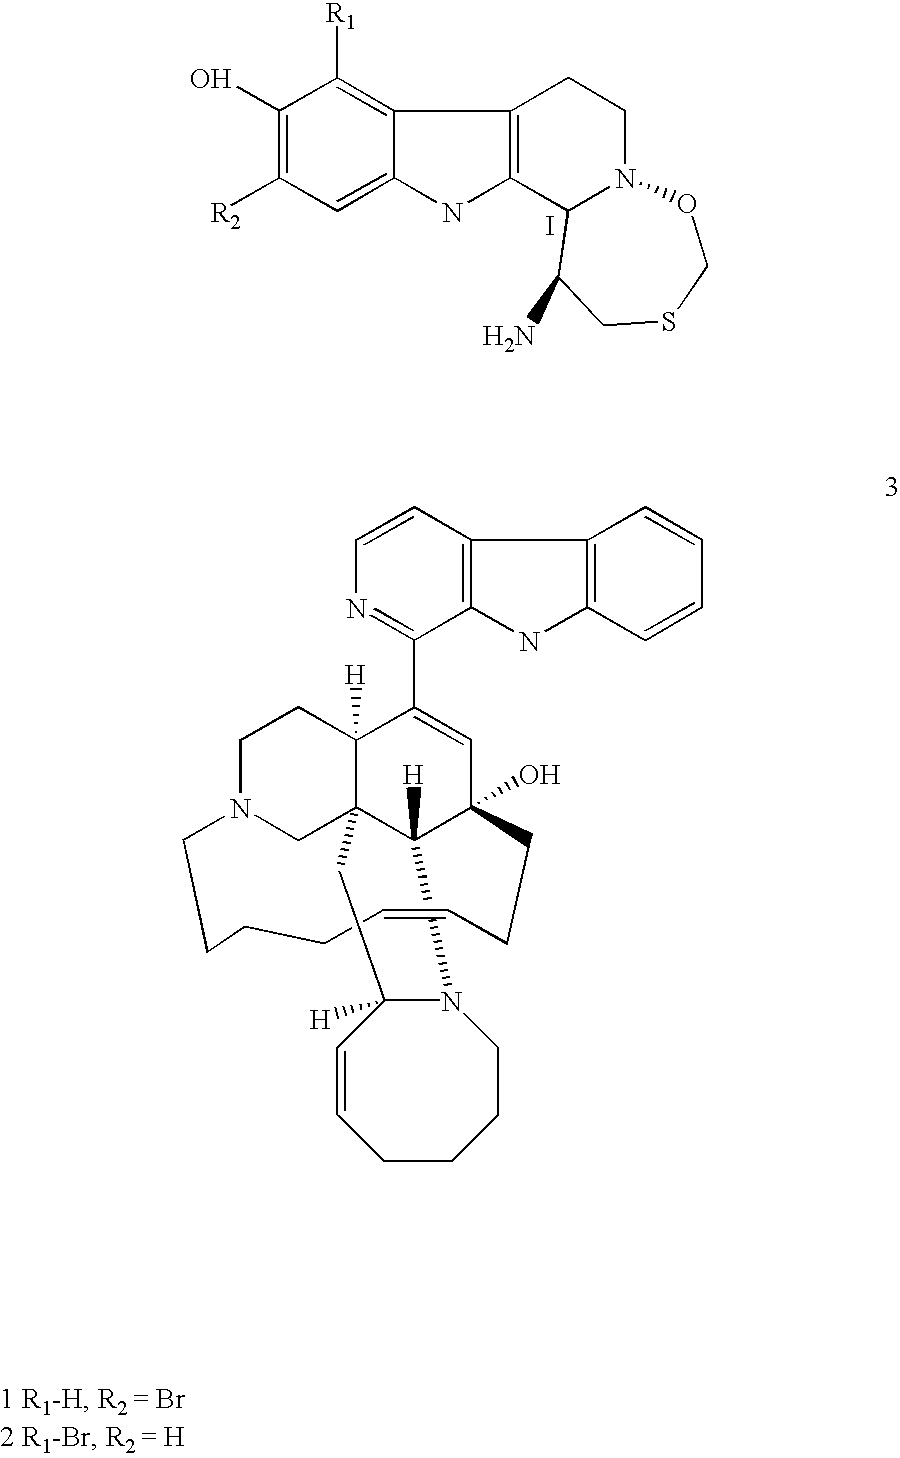 1-substituted 1,2,3,4-tetrahydro-beta-carboline and 3,4-dihydro-beta-carboline and analogs as antitumor agents